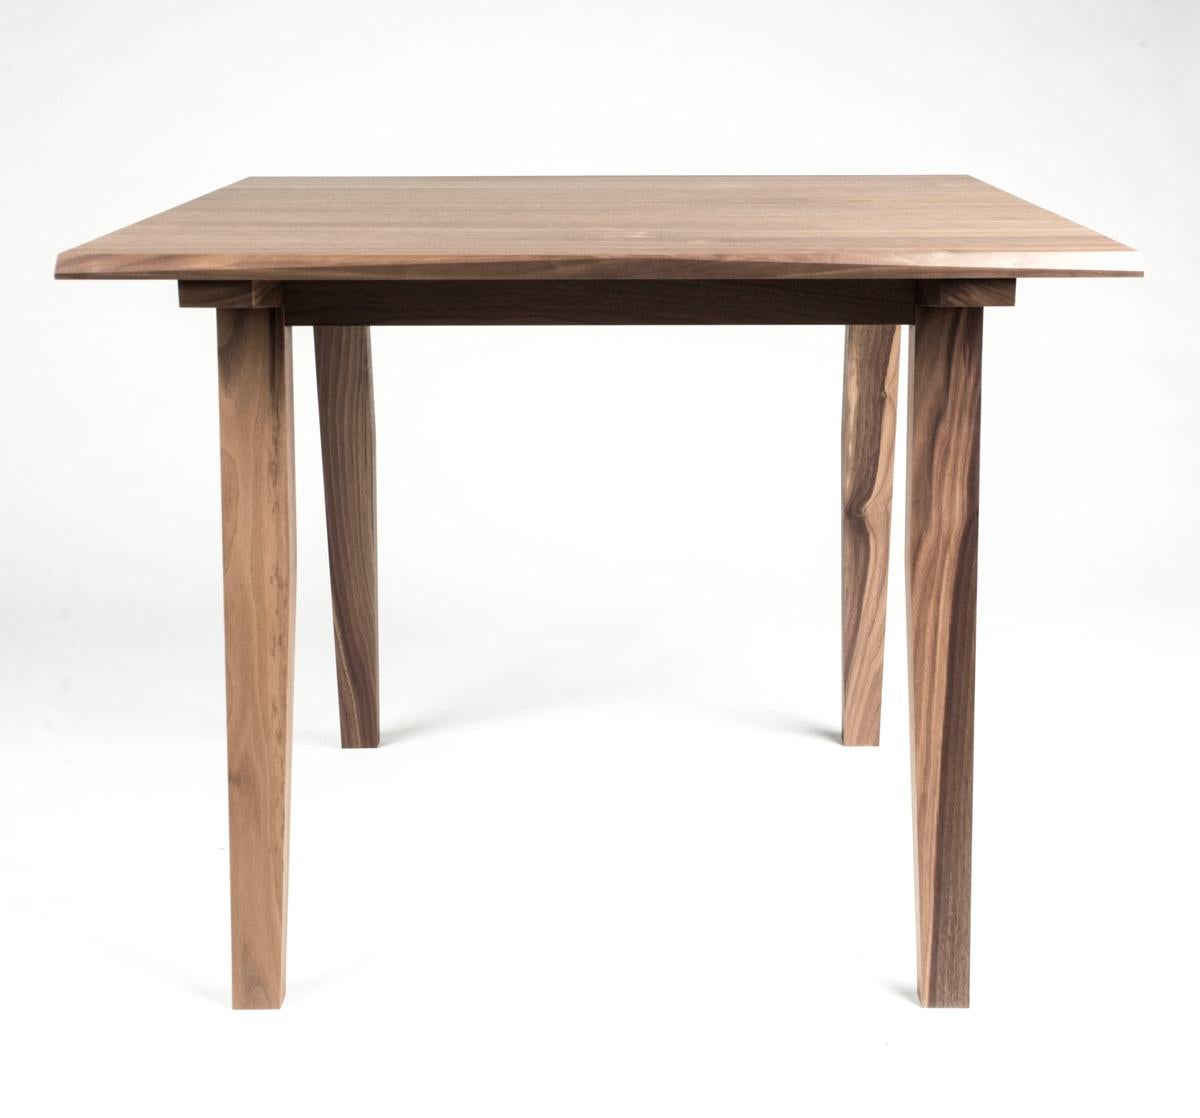 A versatile hardwood table that can be used as a card table, breakfast or apartment sized dining table. Modern styling, hand made out of hardwood and shown here in Walnut. Perfect for apartment living, fully customizable to create the perfect fit